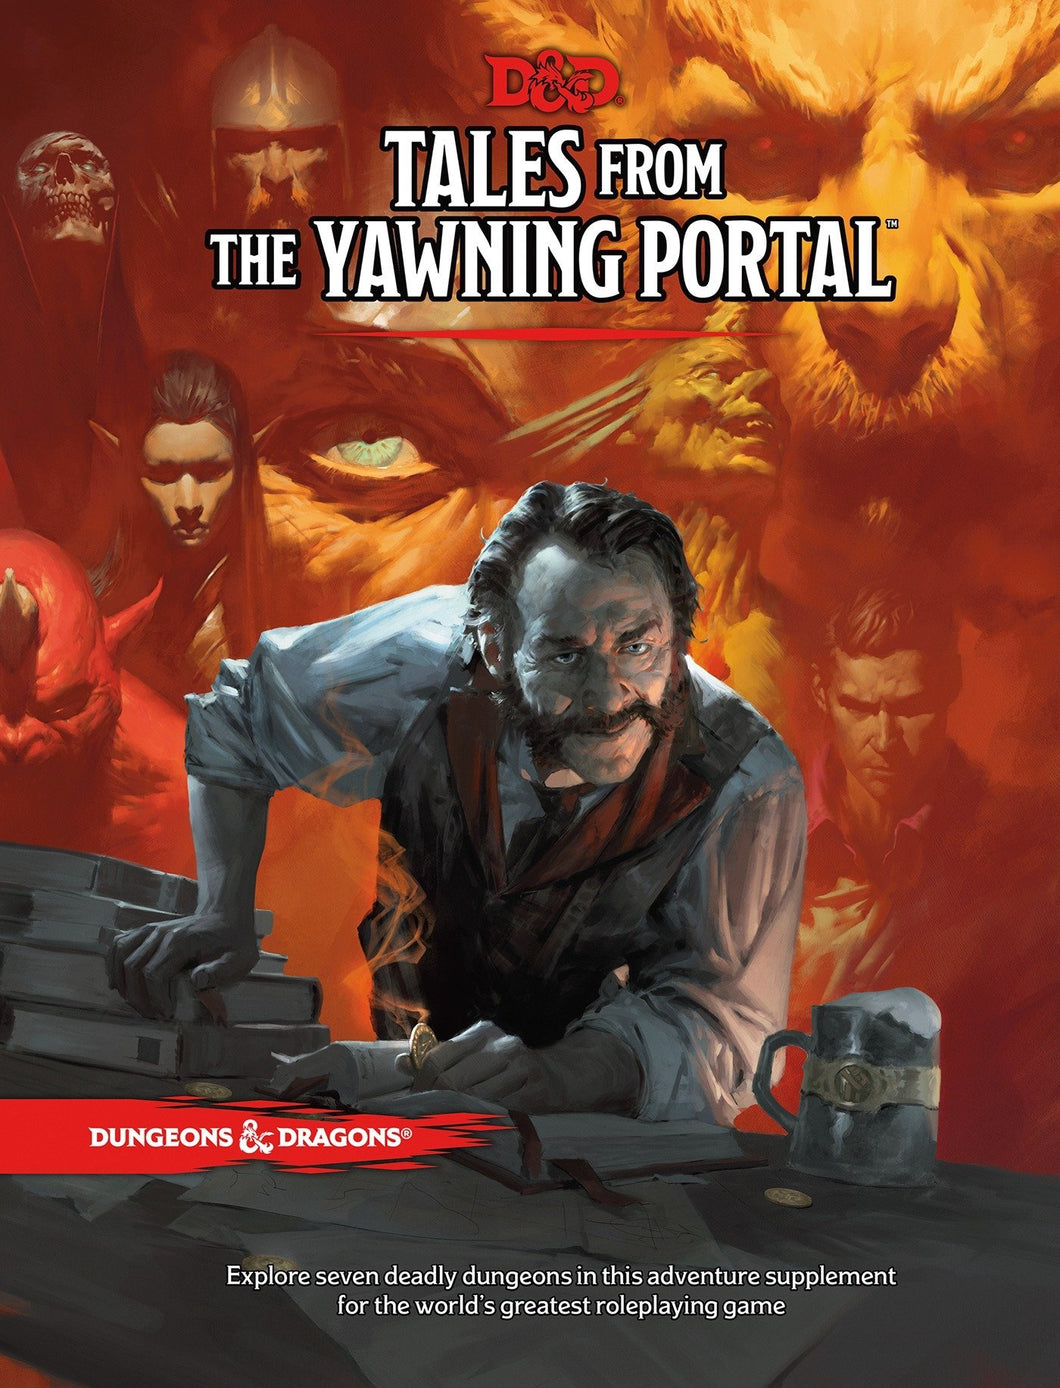 D&D Tales from the Yawning Portal 5th Ed.